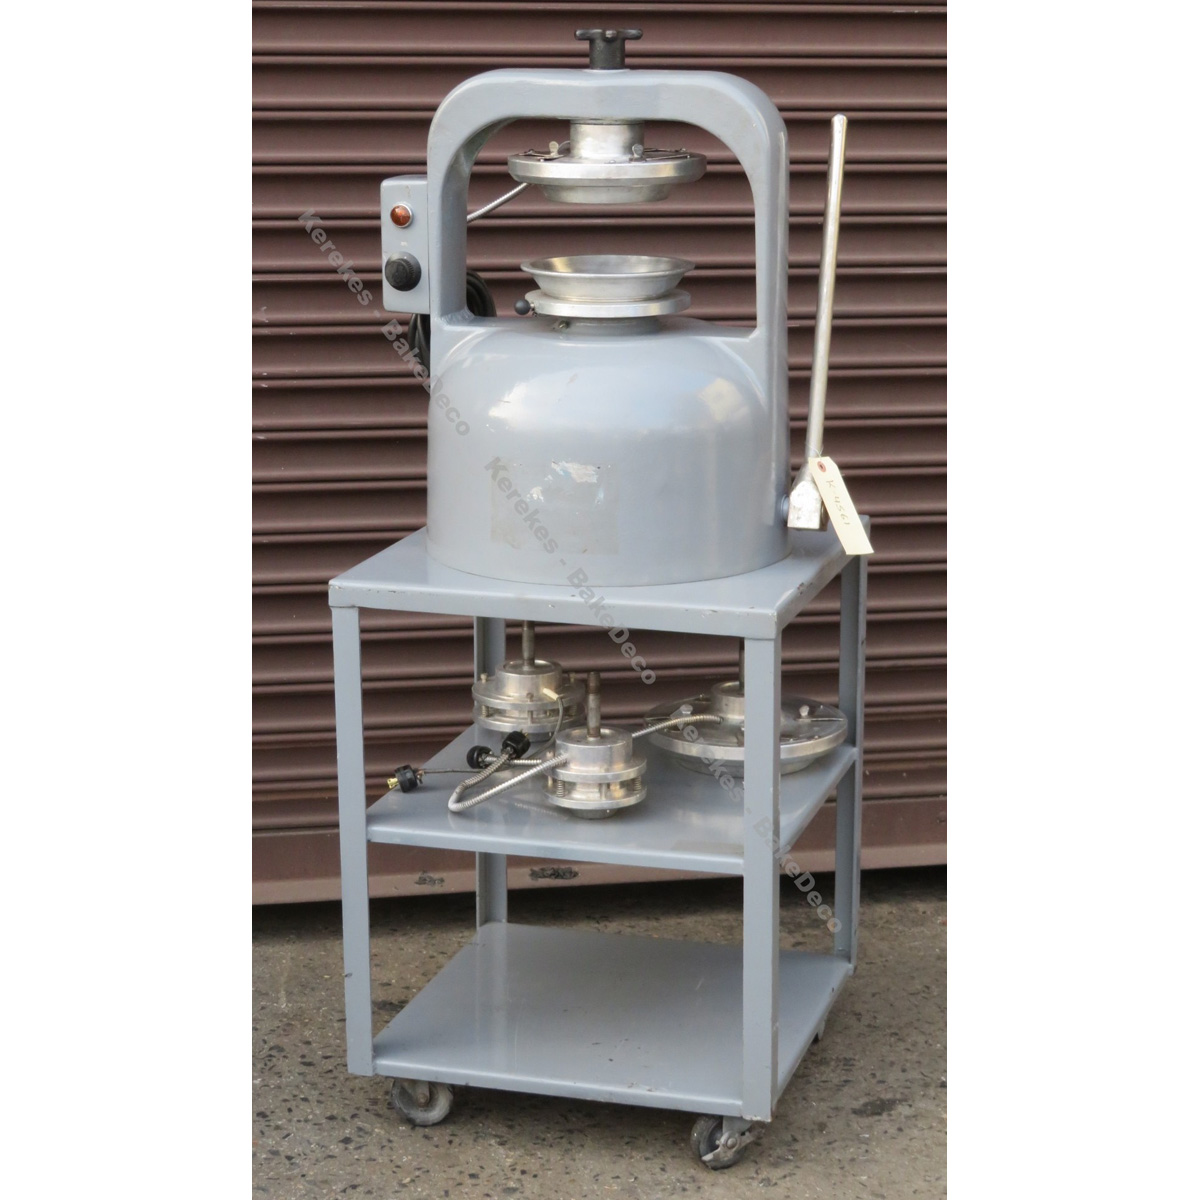 Pie Press, Used Excellent Condition